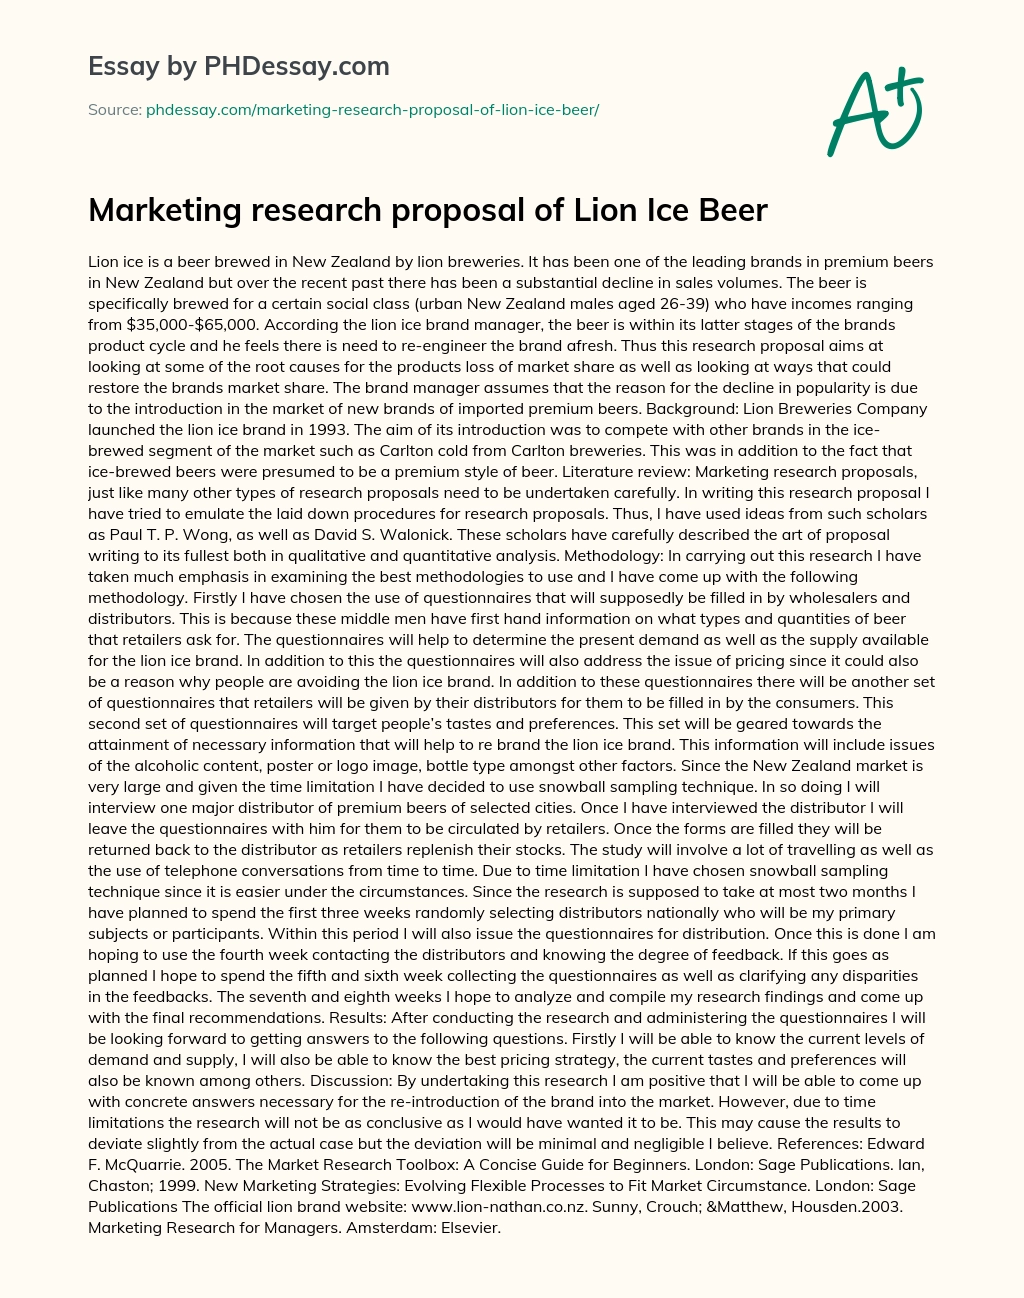 Marketing research proposal of Lion Ice Beer essay